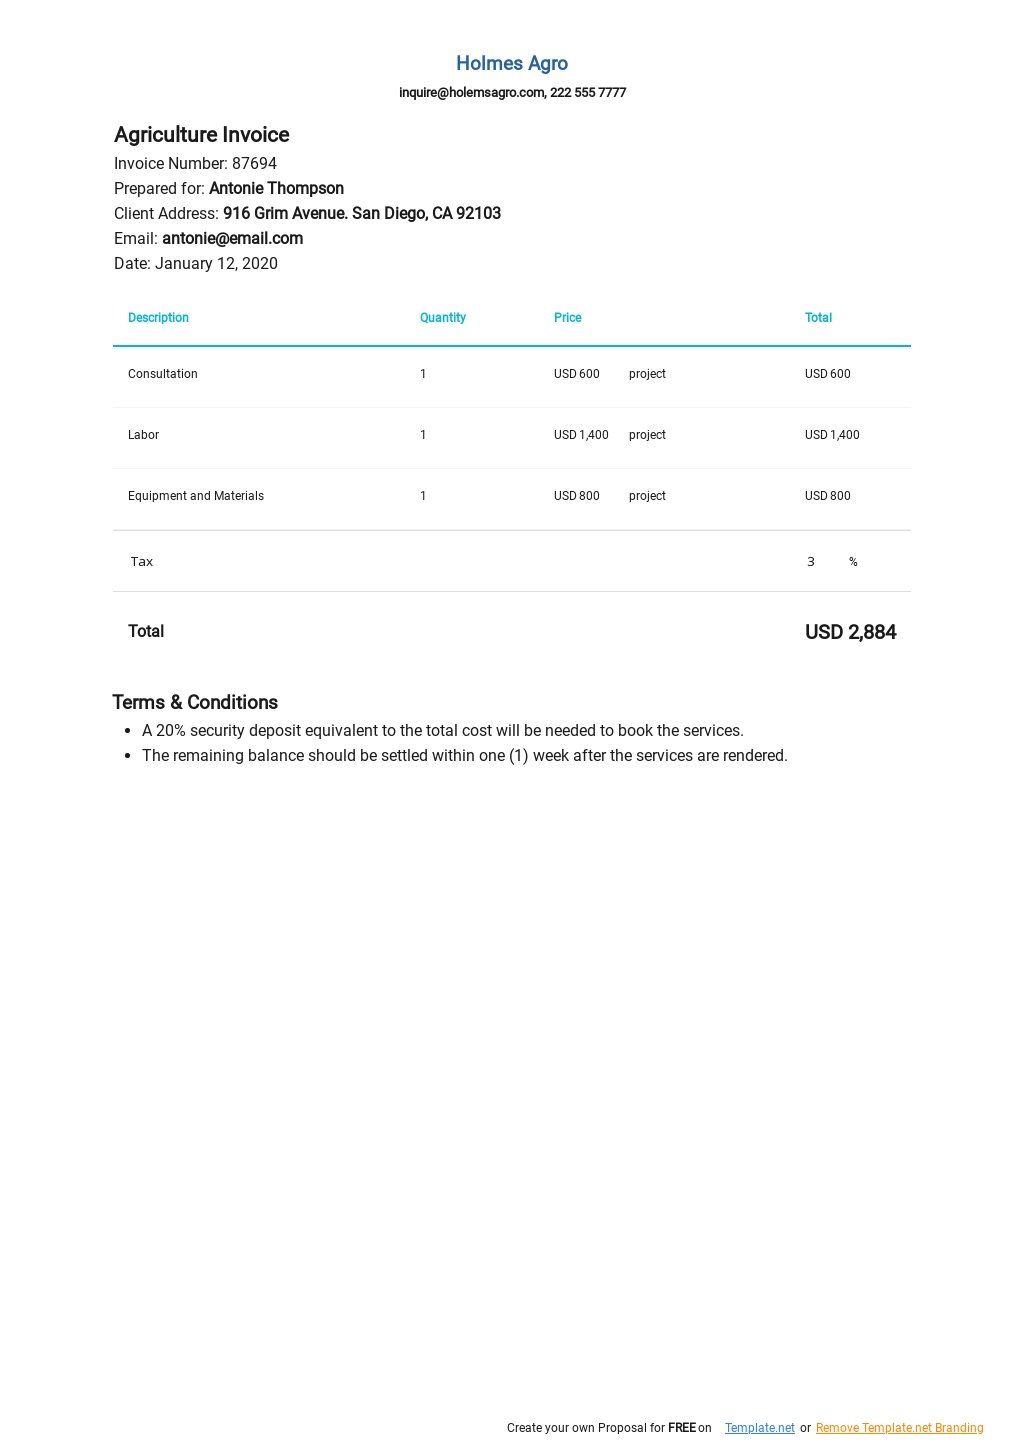 Agriculture Invoice Template [Free PDF] - Google Docs, Excel, Word ...